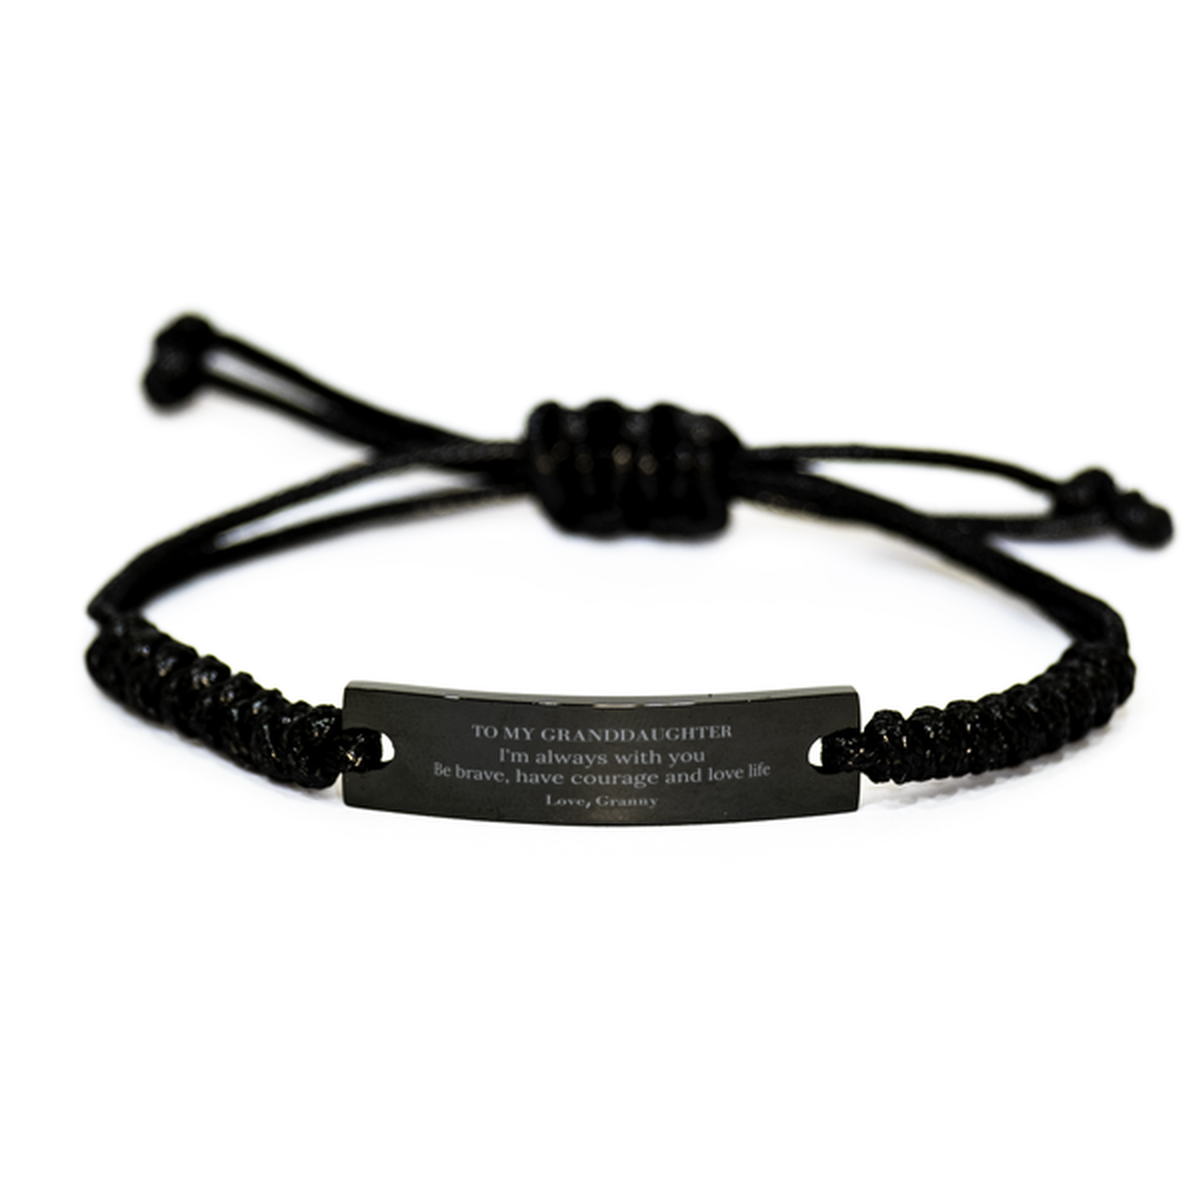 To My Granddaughter Gifts from Granny, Unique Black Rope Bracelet Inspirational Christmas Birthday Graduation Gifts for Granddaughter I'm always with you. Be brave, have courage and love life. Love, Granny